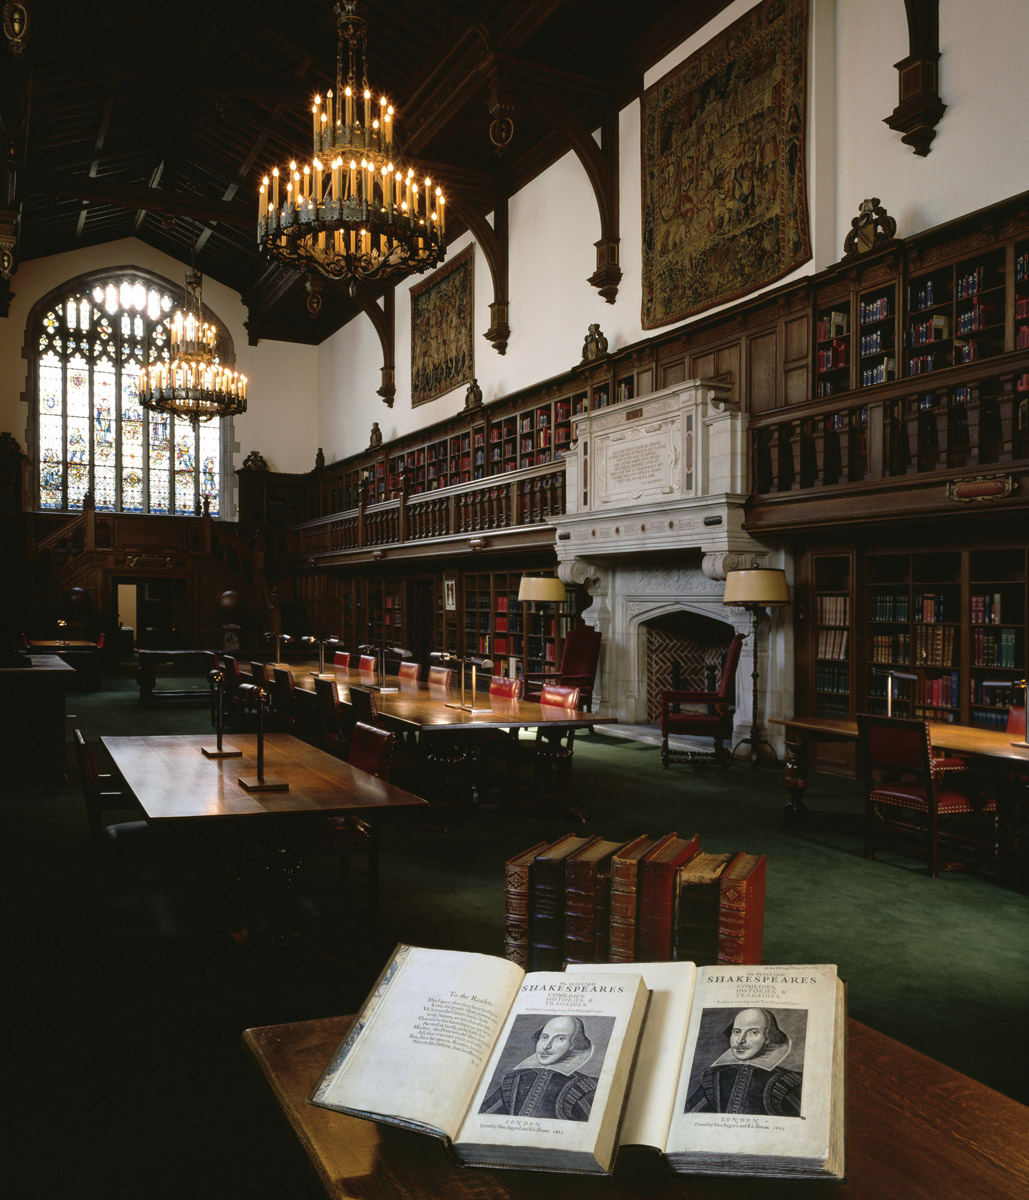 The reading room at the Folger Library